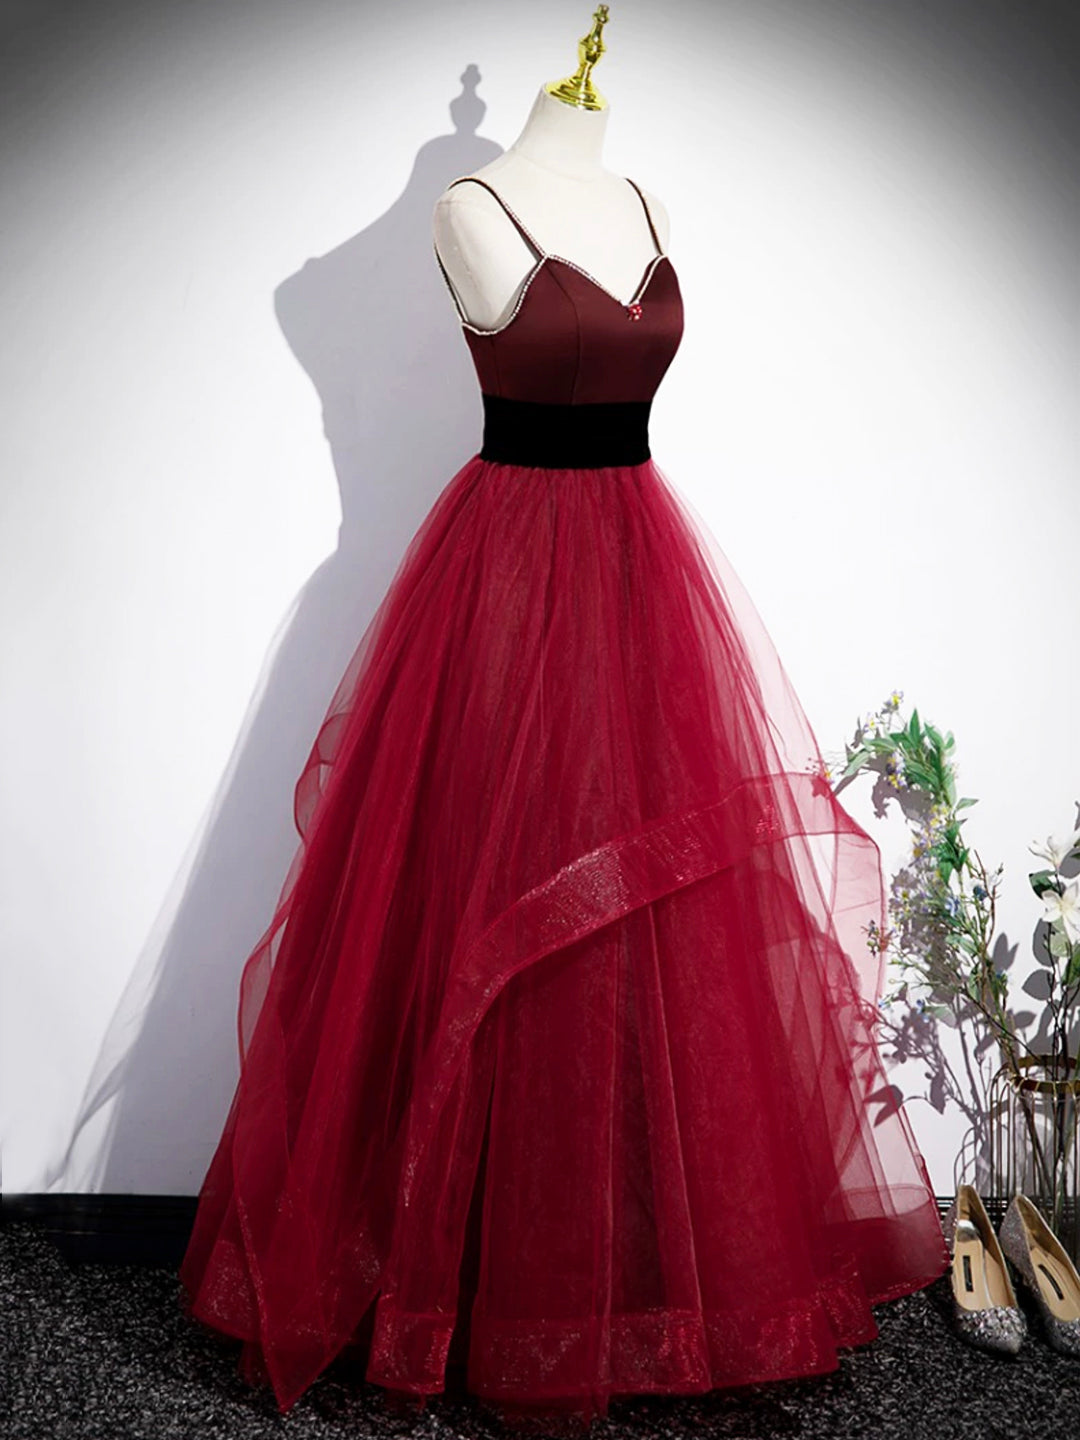 Party Dress Emerald Green, Burgundy Spaghetti Strap Tulle Long Corset Prom Dress, A-Line Evening Party Dress